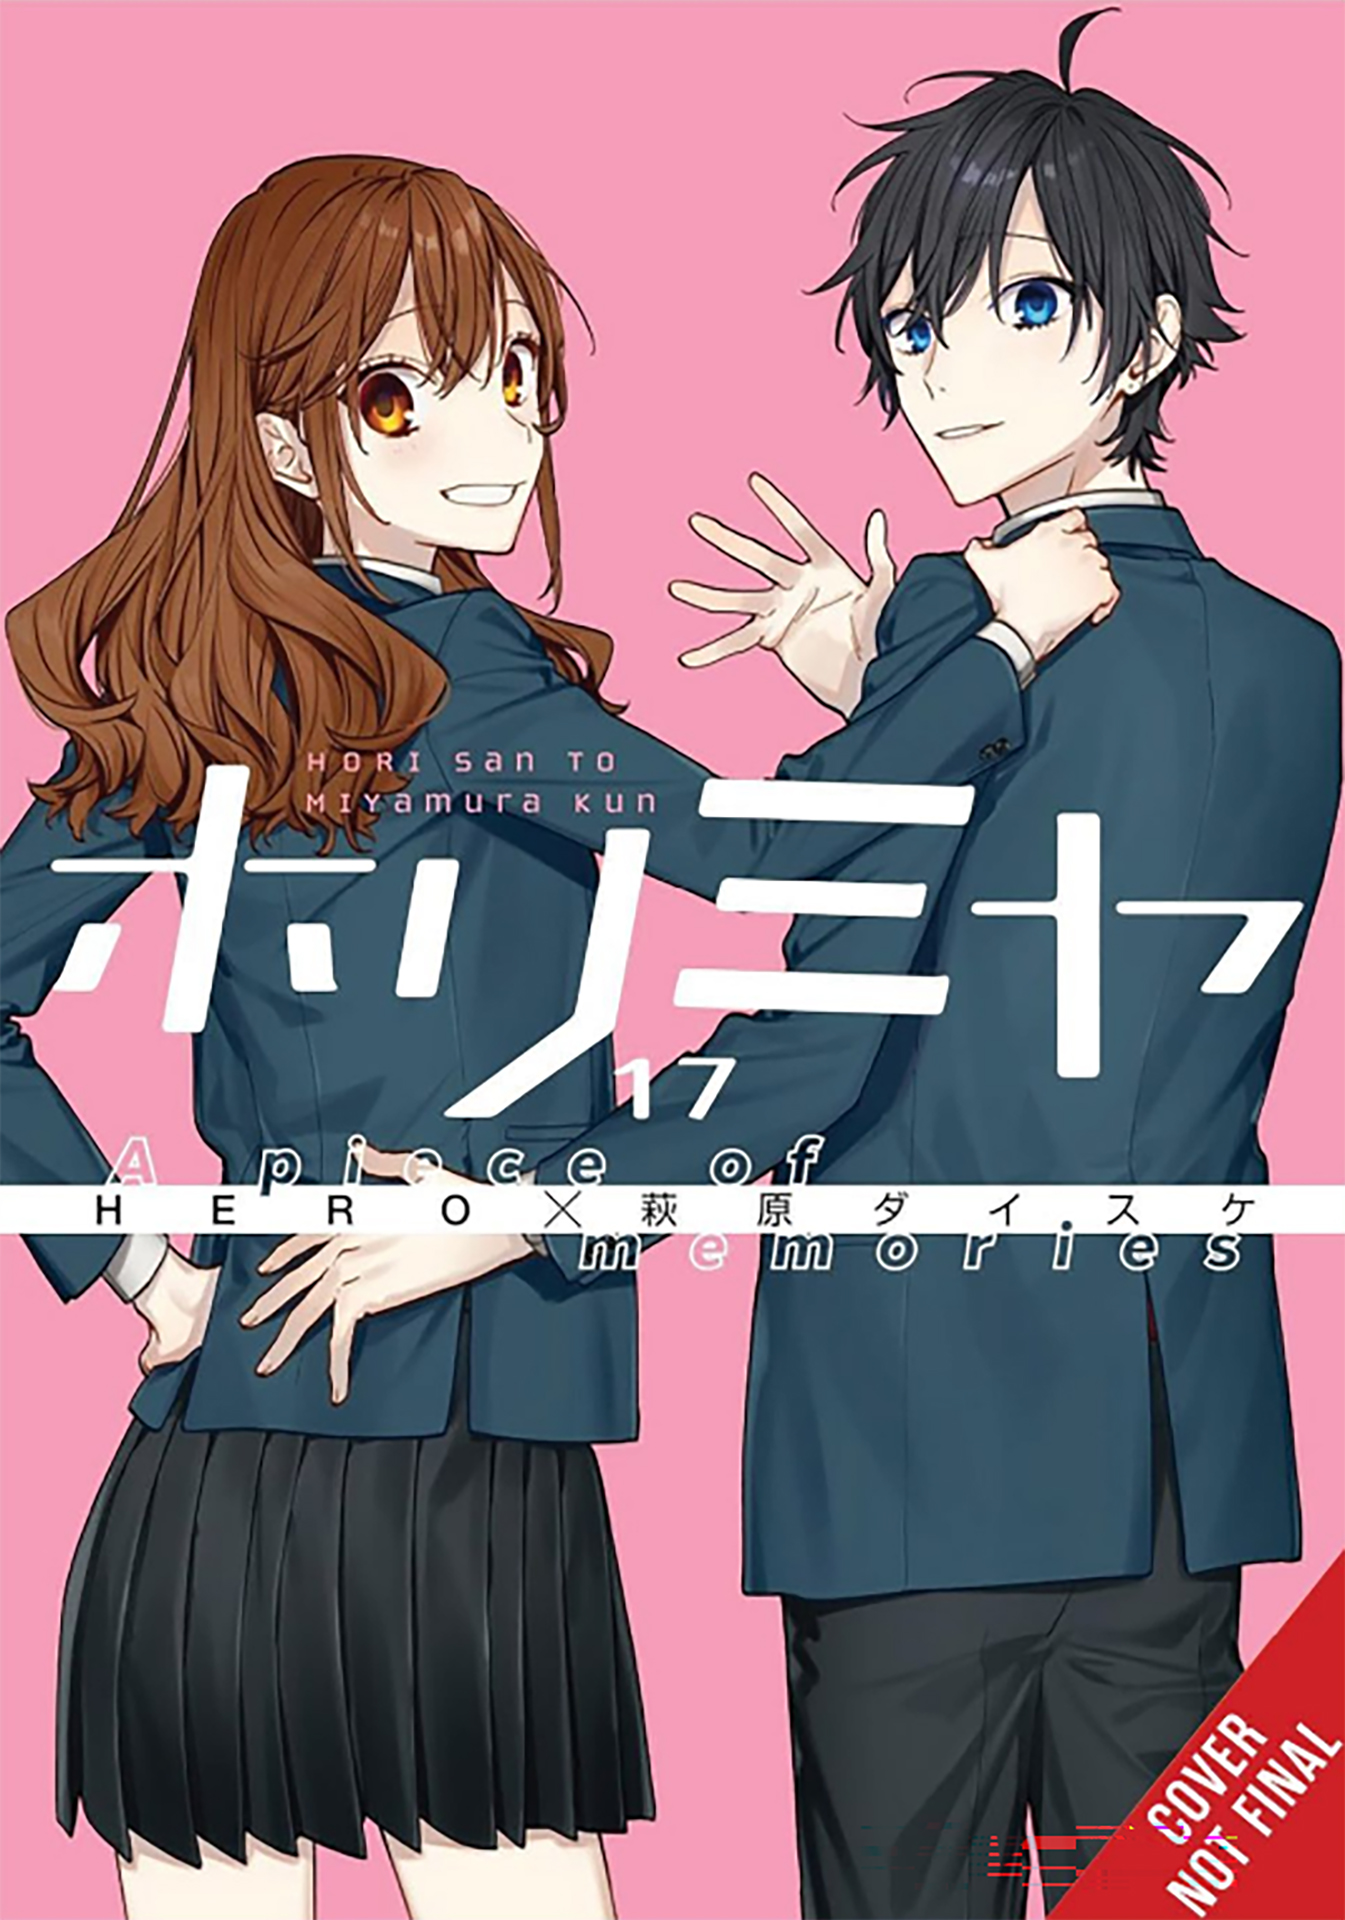 Beloved romance manga Horimiya returns with a new story from the original creator and more in an all-new volume